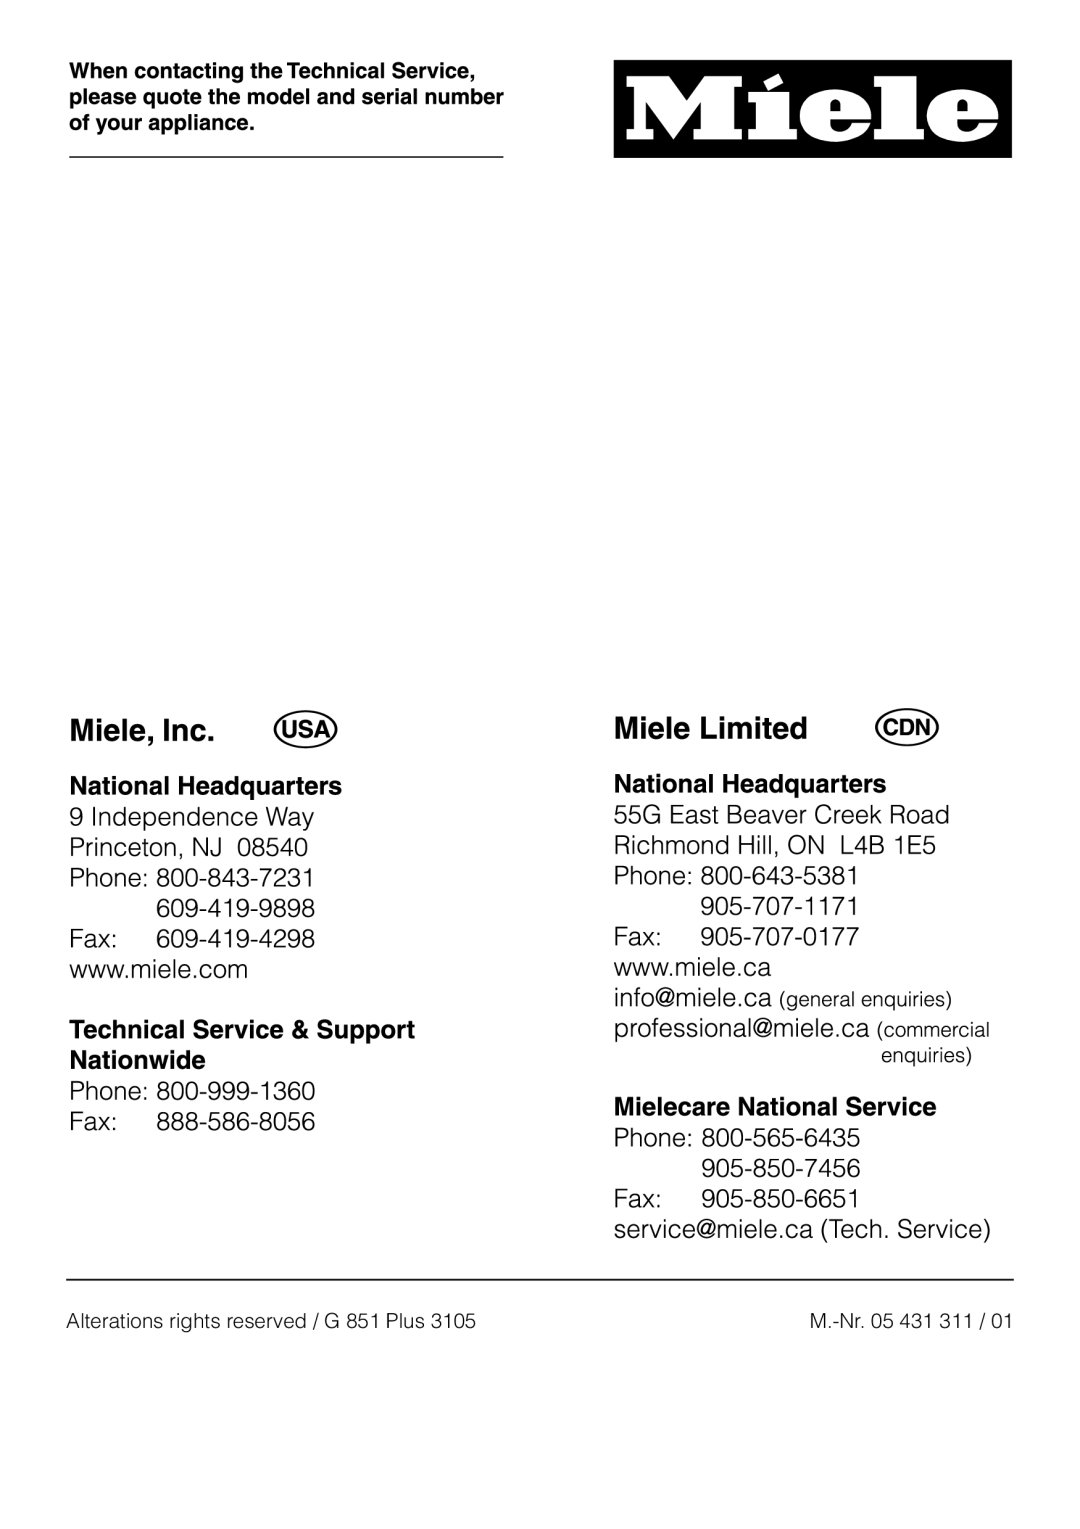 Miele G 851 SC Plus operating instructions Alterations rights reserved / G 851 Plus, M.-Nr.05 